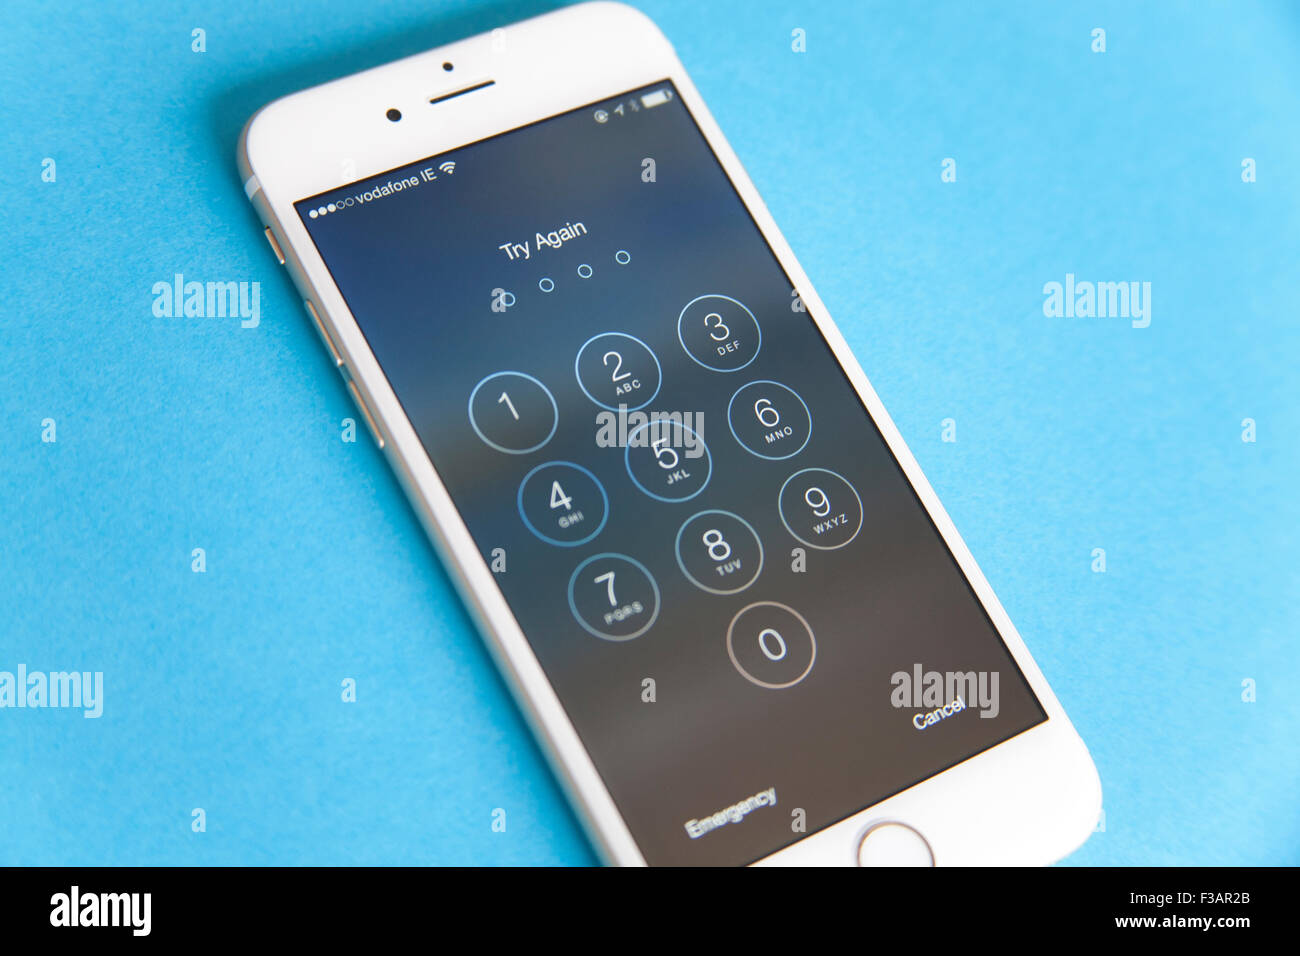 Gold and white Apple iPhone 6 with log in screen for password, against a blue background Stock Photo